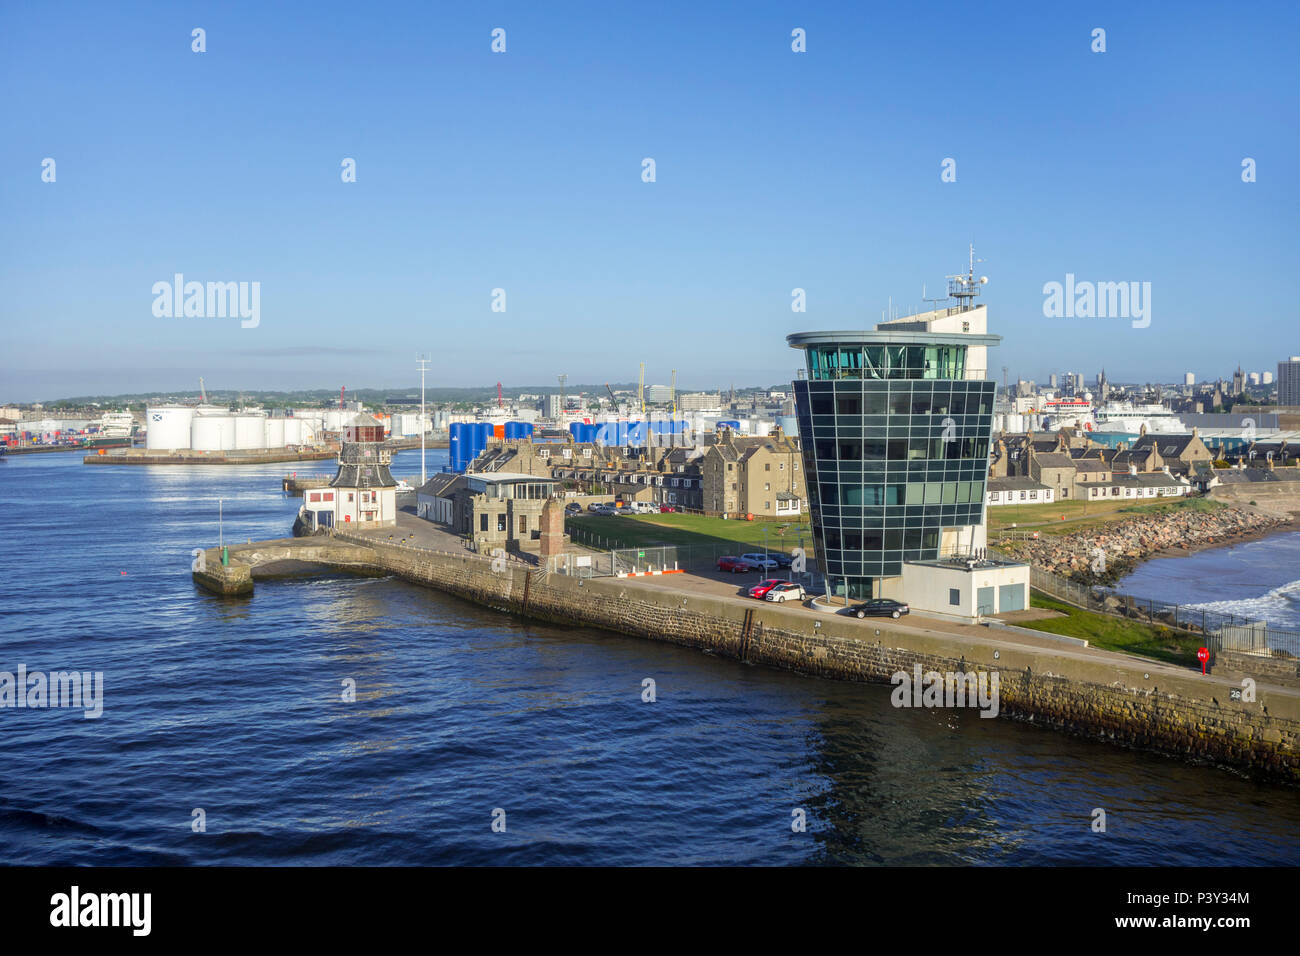 Marine Operations Centre and old harbour master's control tower at entrance to the Aberdeen port, Aberdeenshire, Scotland, UK Stock Photo